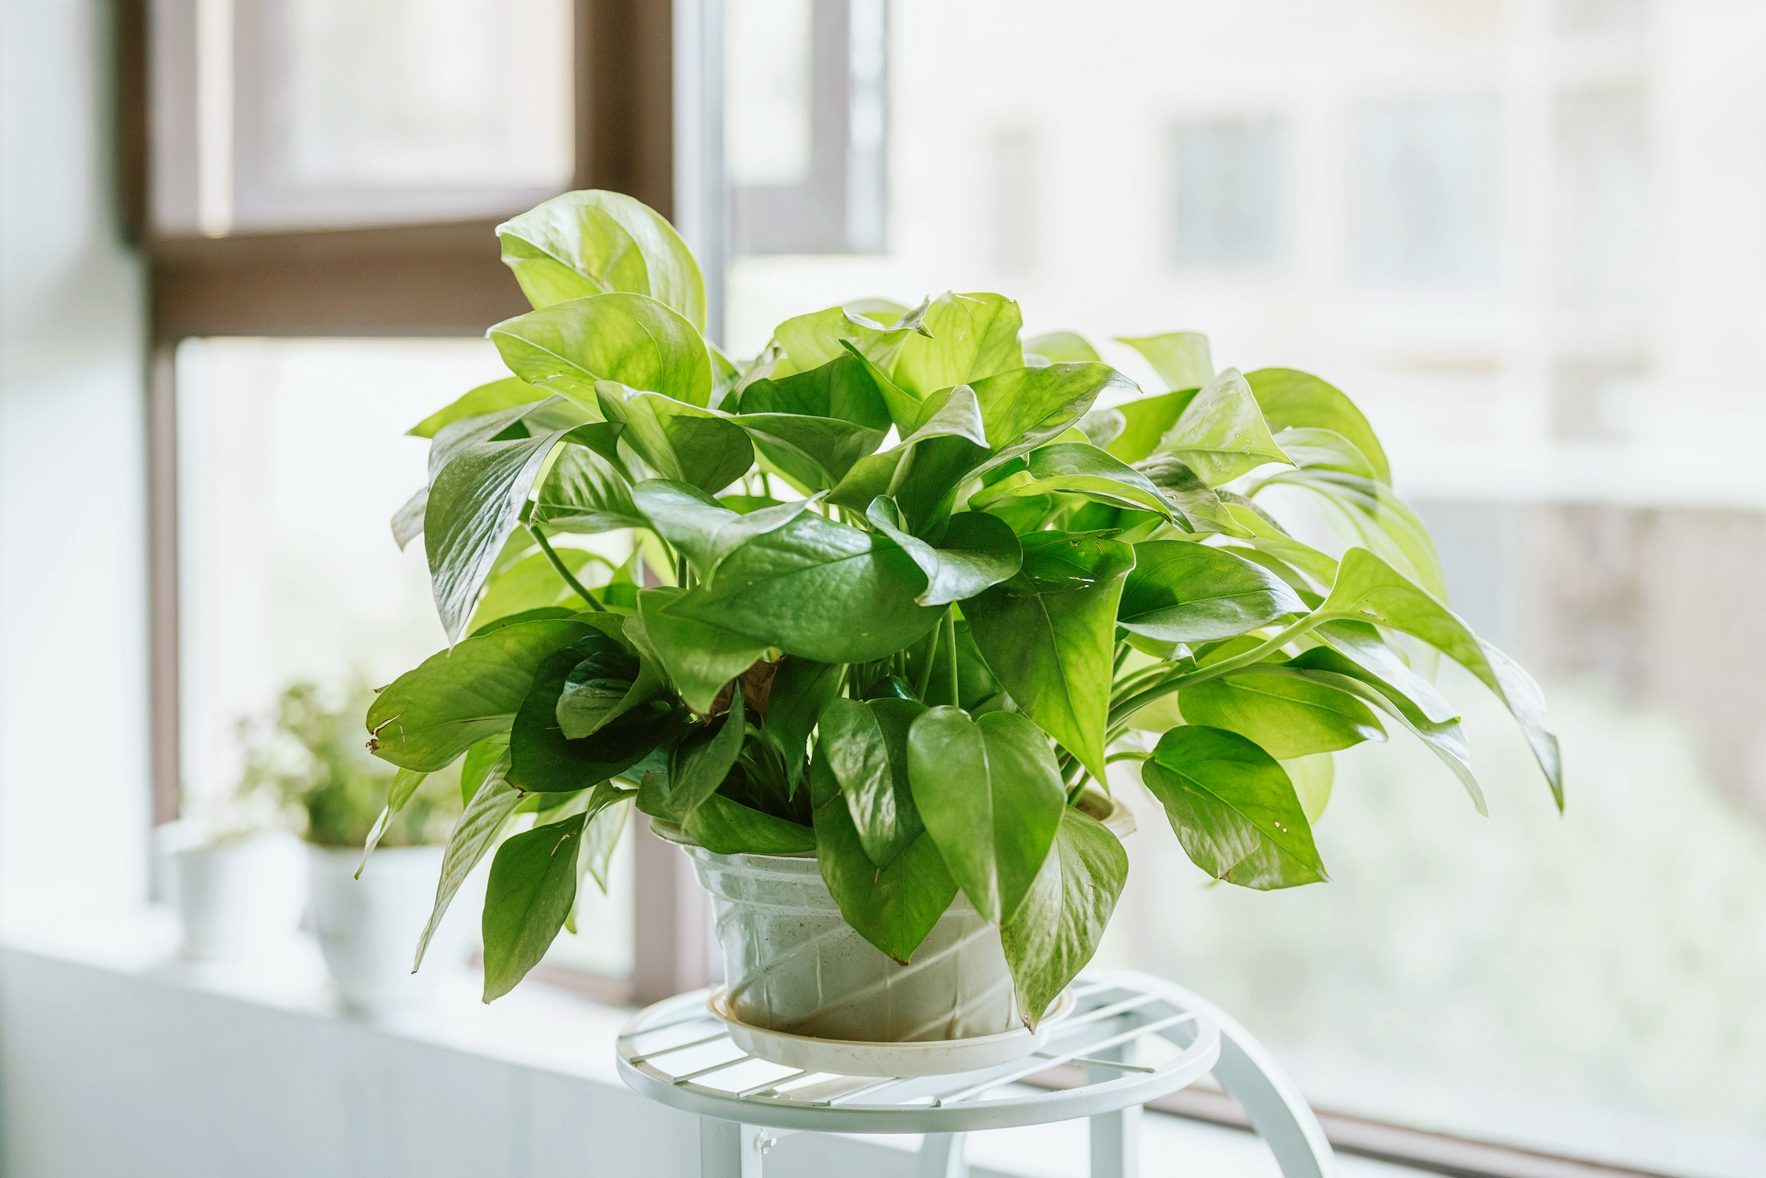 Growing and Caring for a Pothos Plant